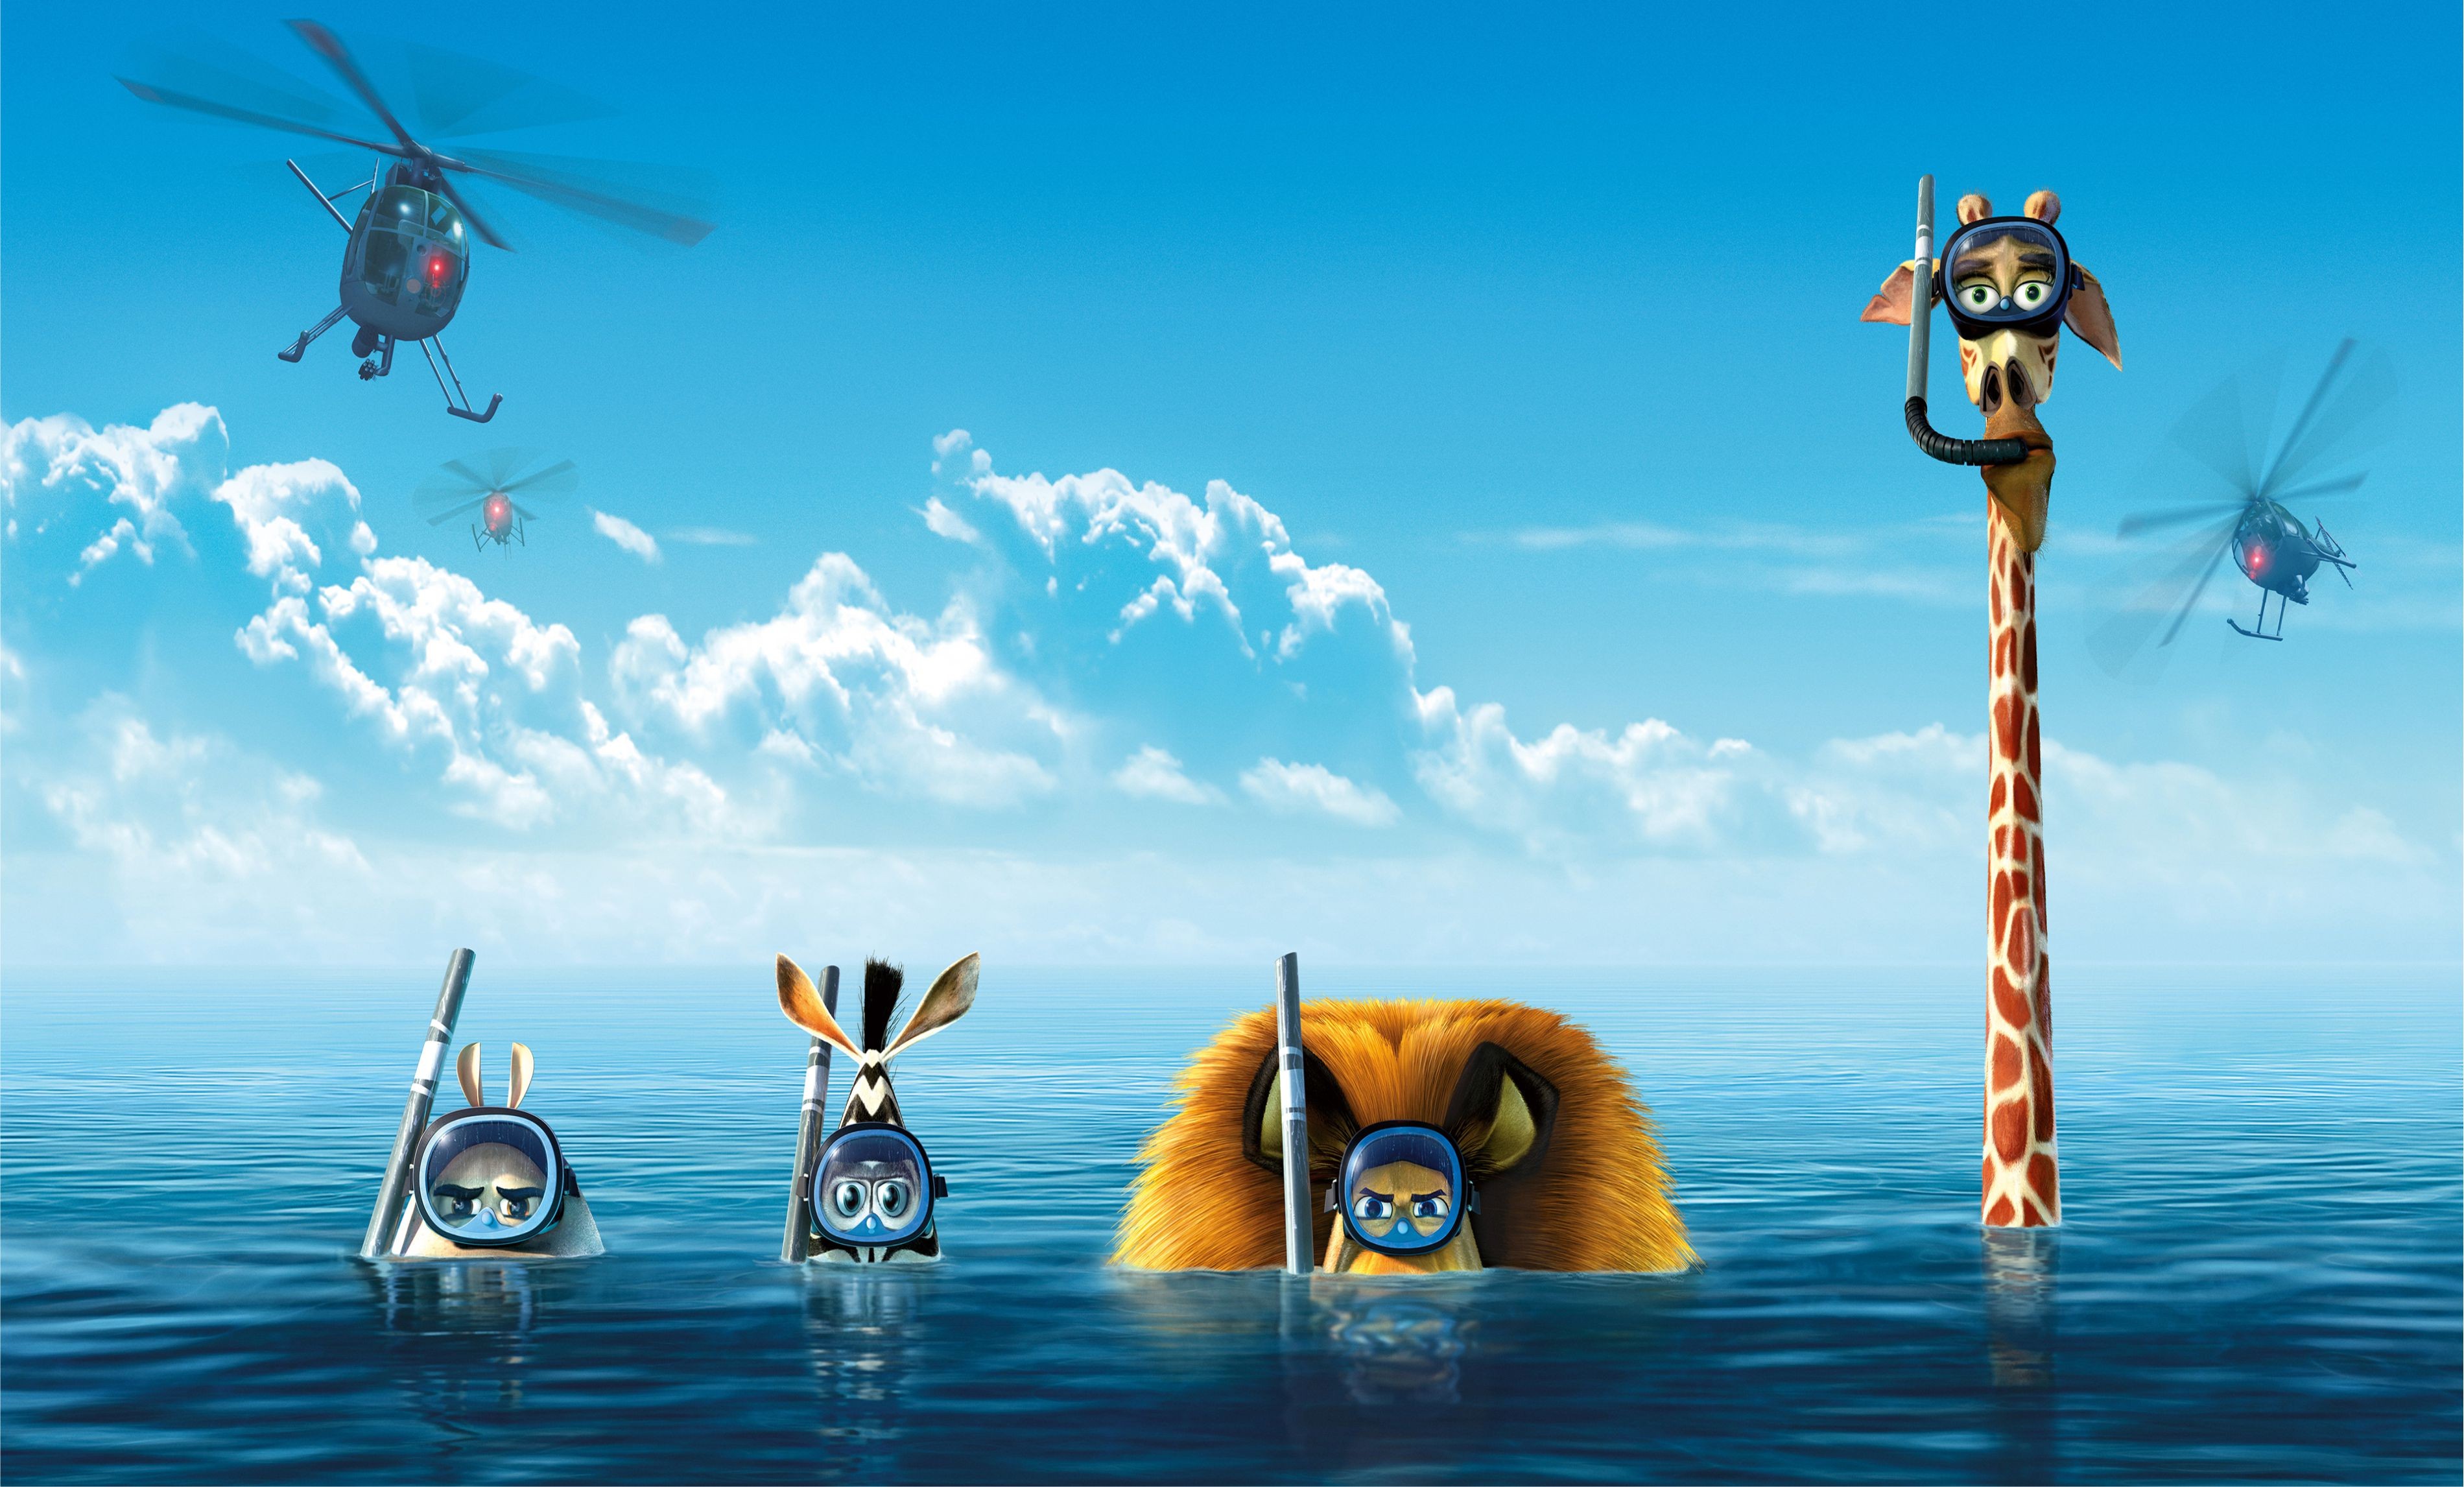 General 3800x2293 Madagascar (movie) movies animated movies digital art in water looking at viewer sky swimming goggles water helicopters aircraft giraffes hippos zebras lion clouds